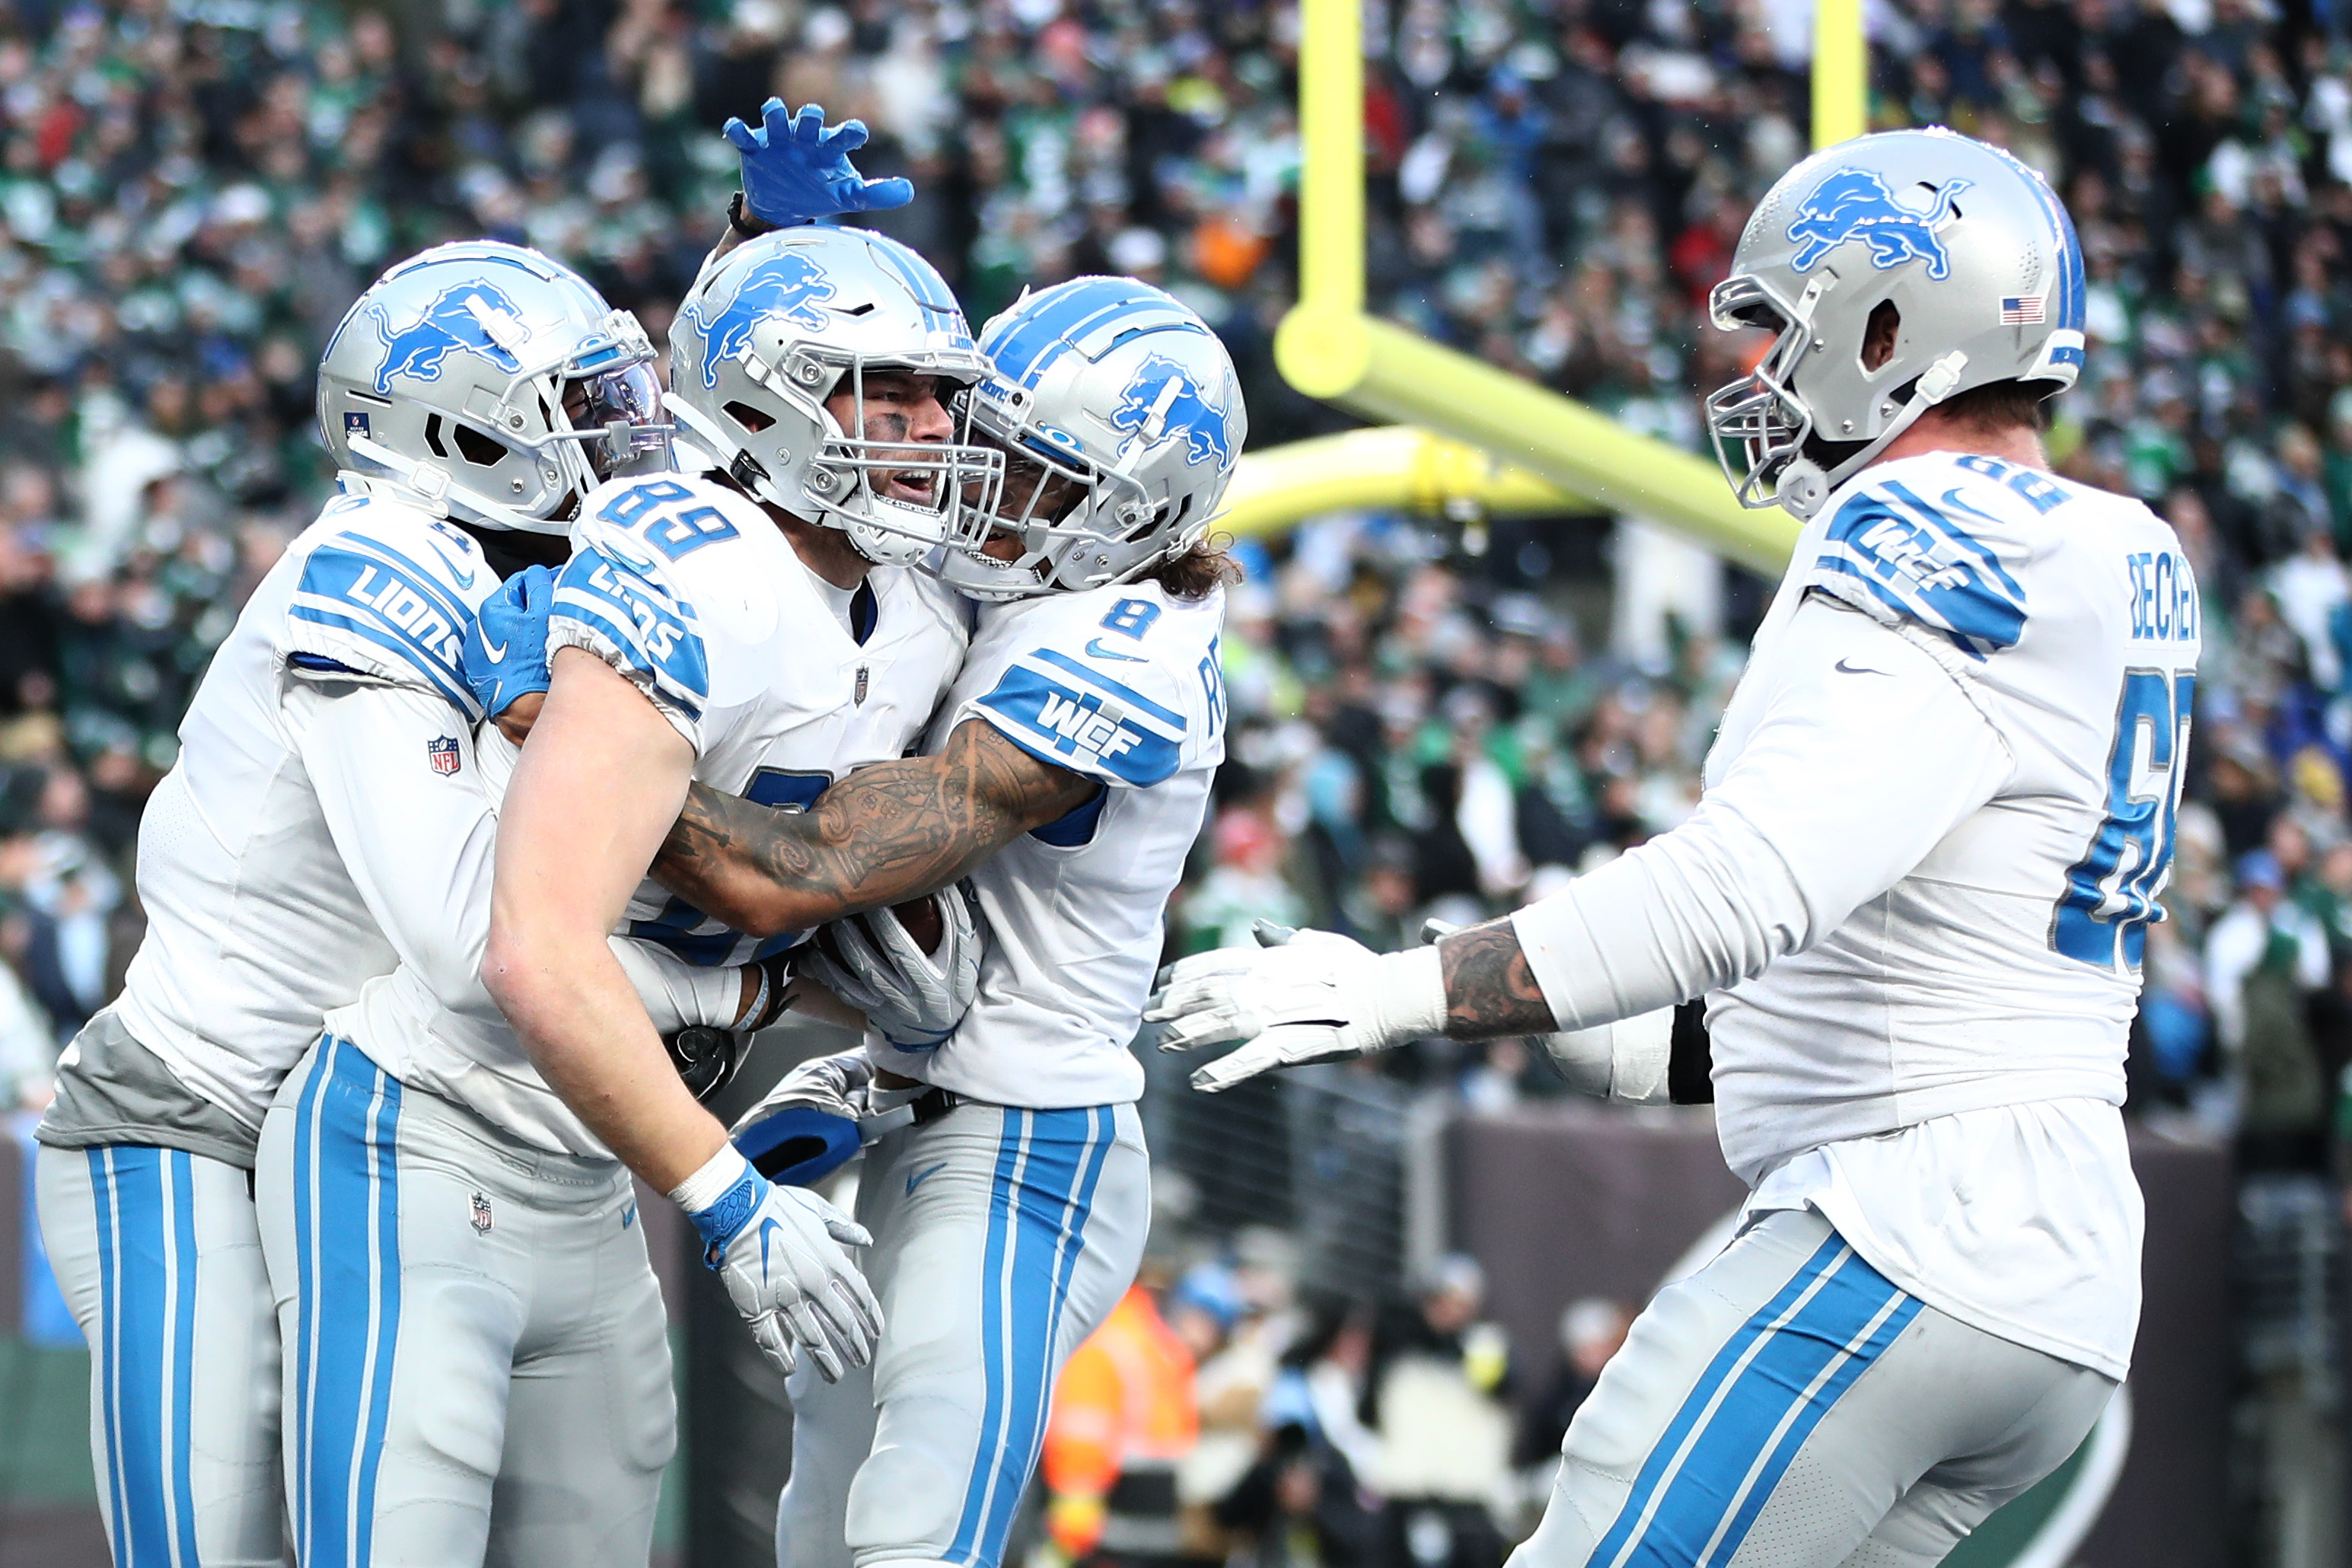 Detroit Lions - Imagine it. It's Sunday and the Lions are about to